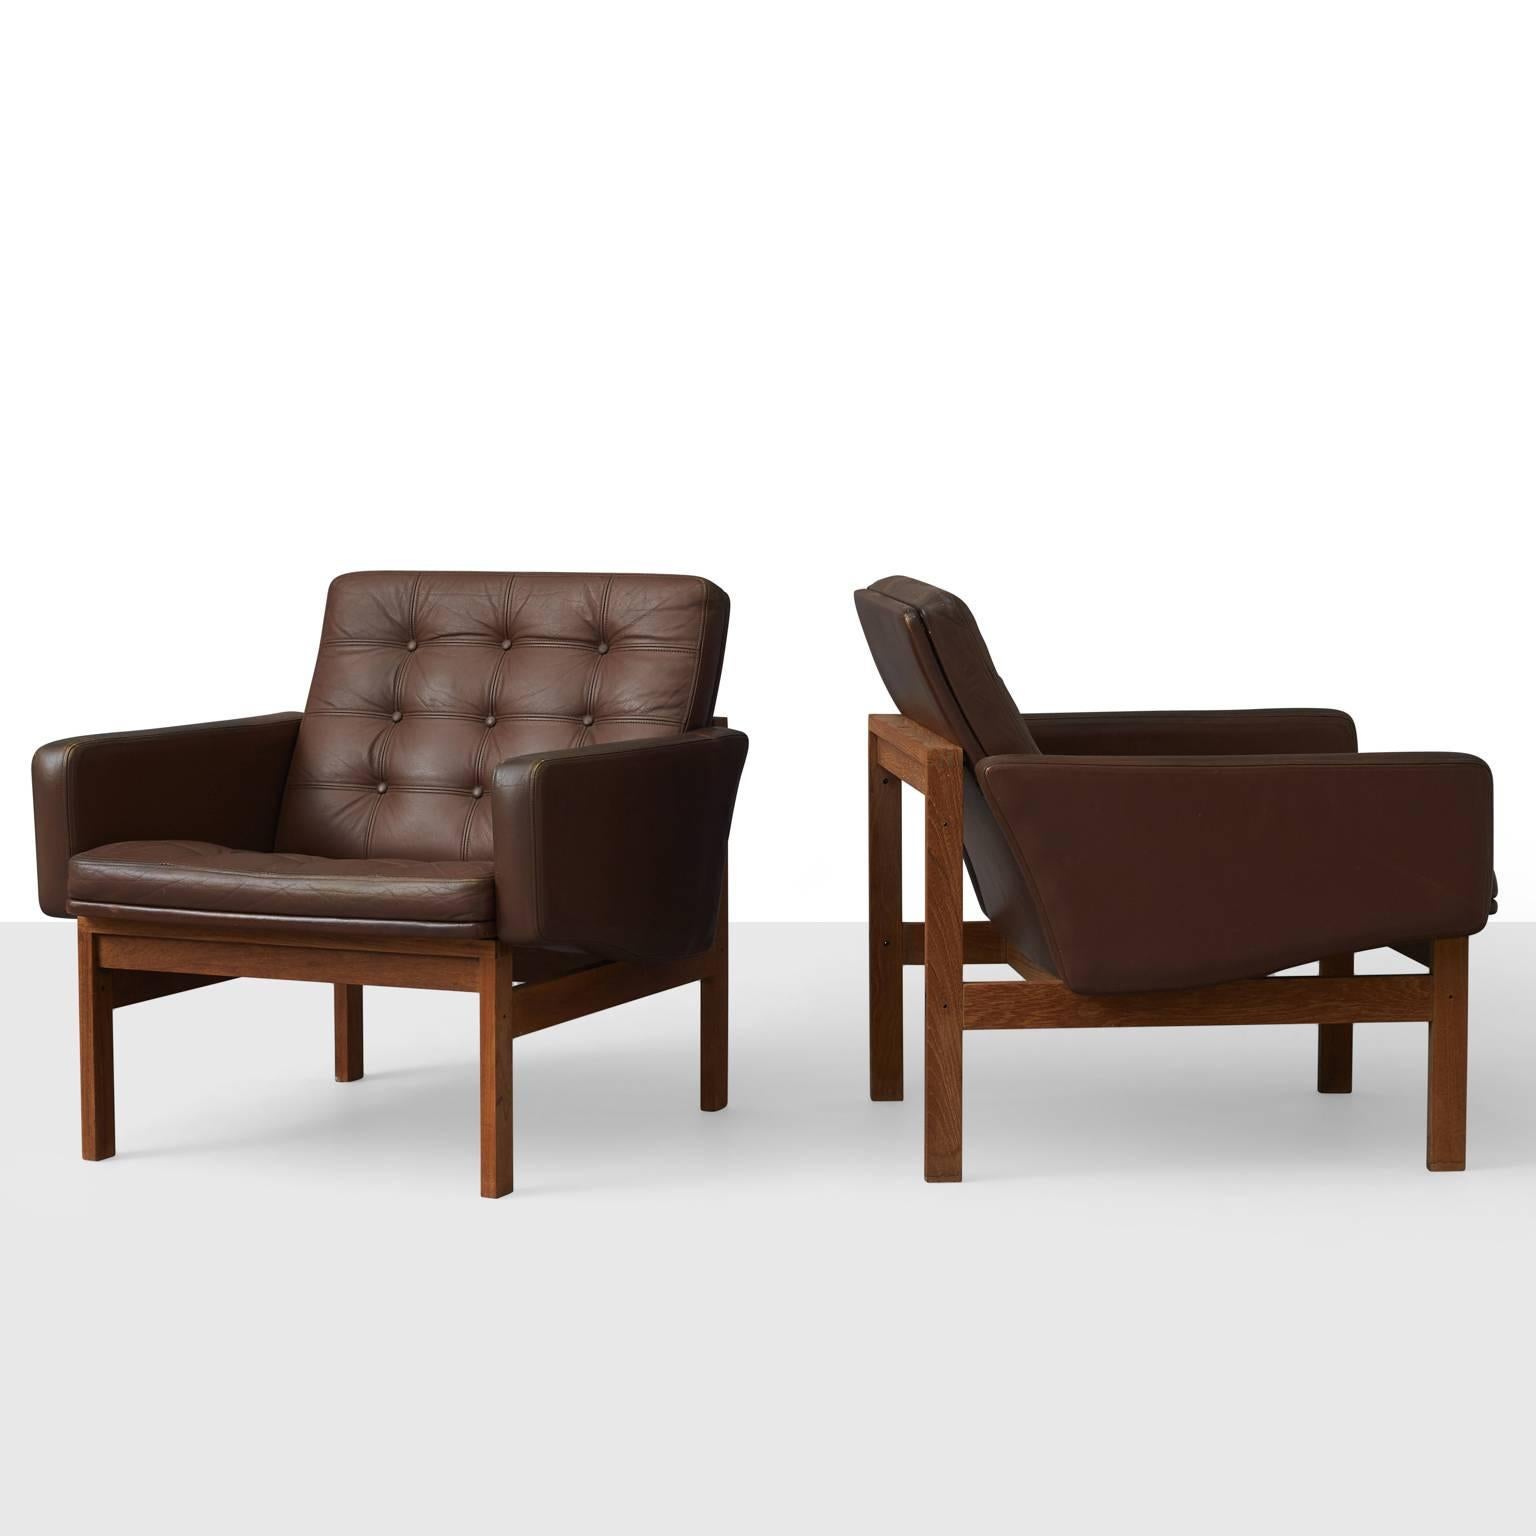 A pair of lounge chairs by Ole Gjerløv - Knudsen & Torben Lind. Each featuring a teak frame, patinated brown leather upholstery and button tufted seat and back cushions.
 